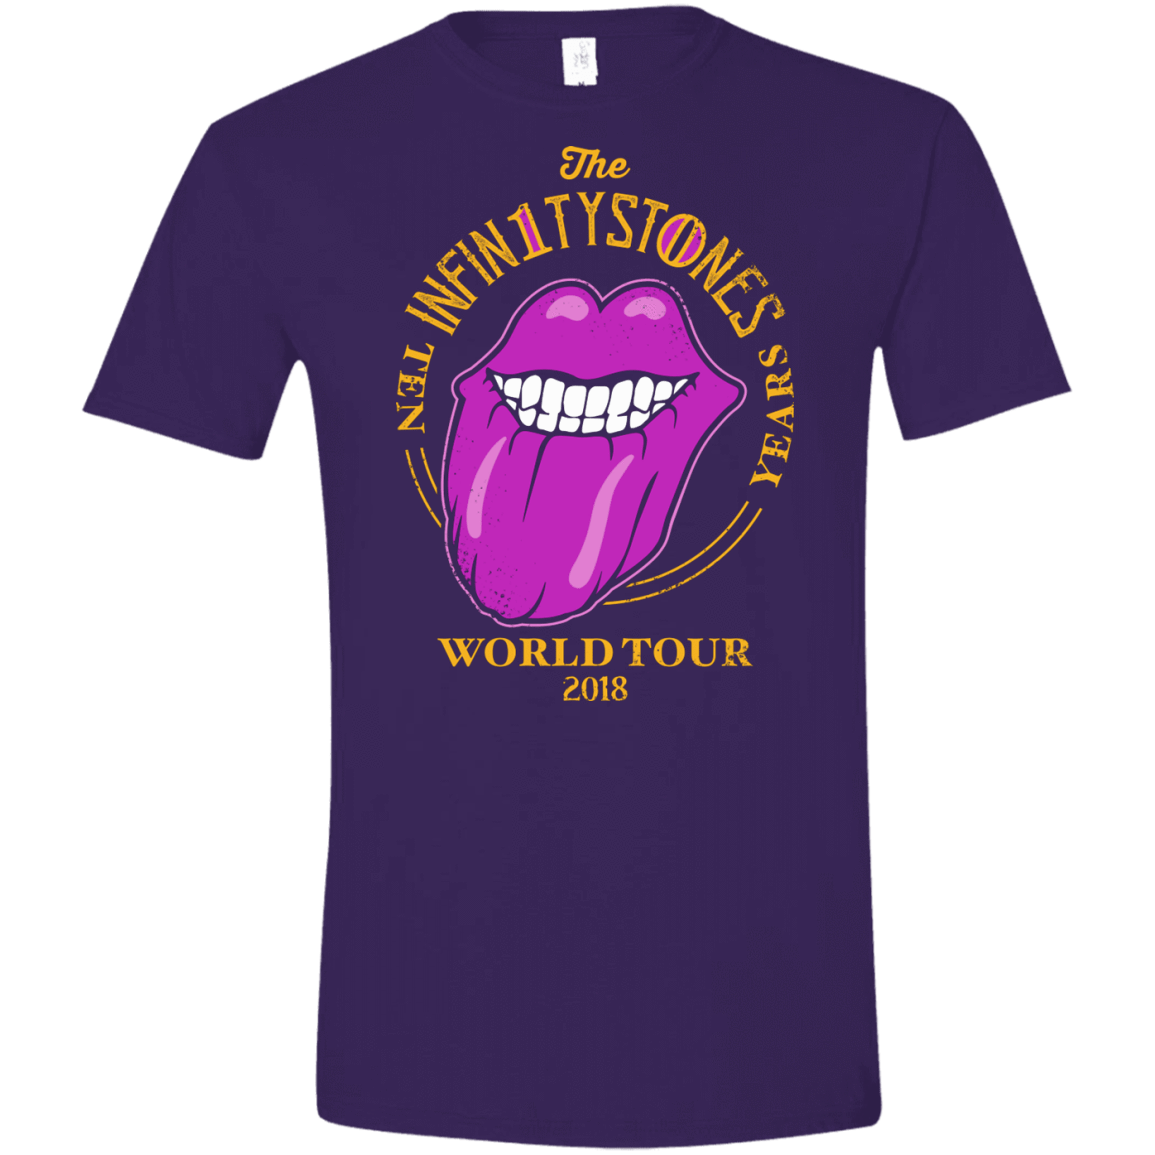 T-Shirts Purple / S Stones World Tour Men's Semi-Fitted Softstyle